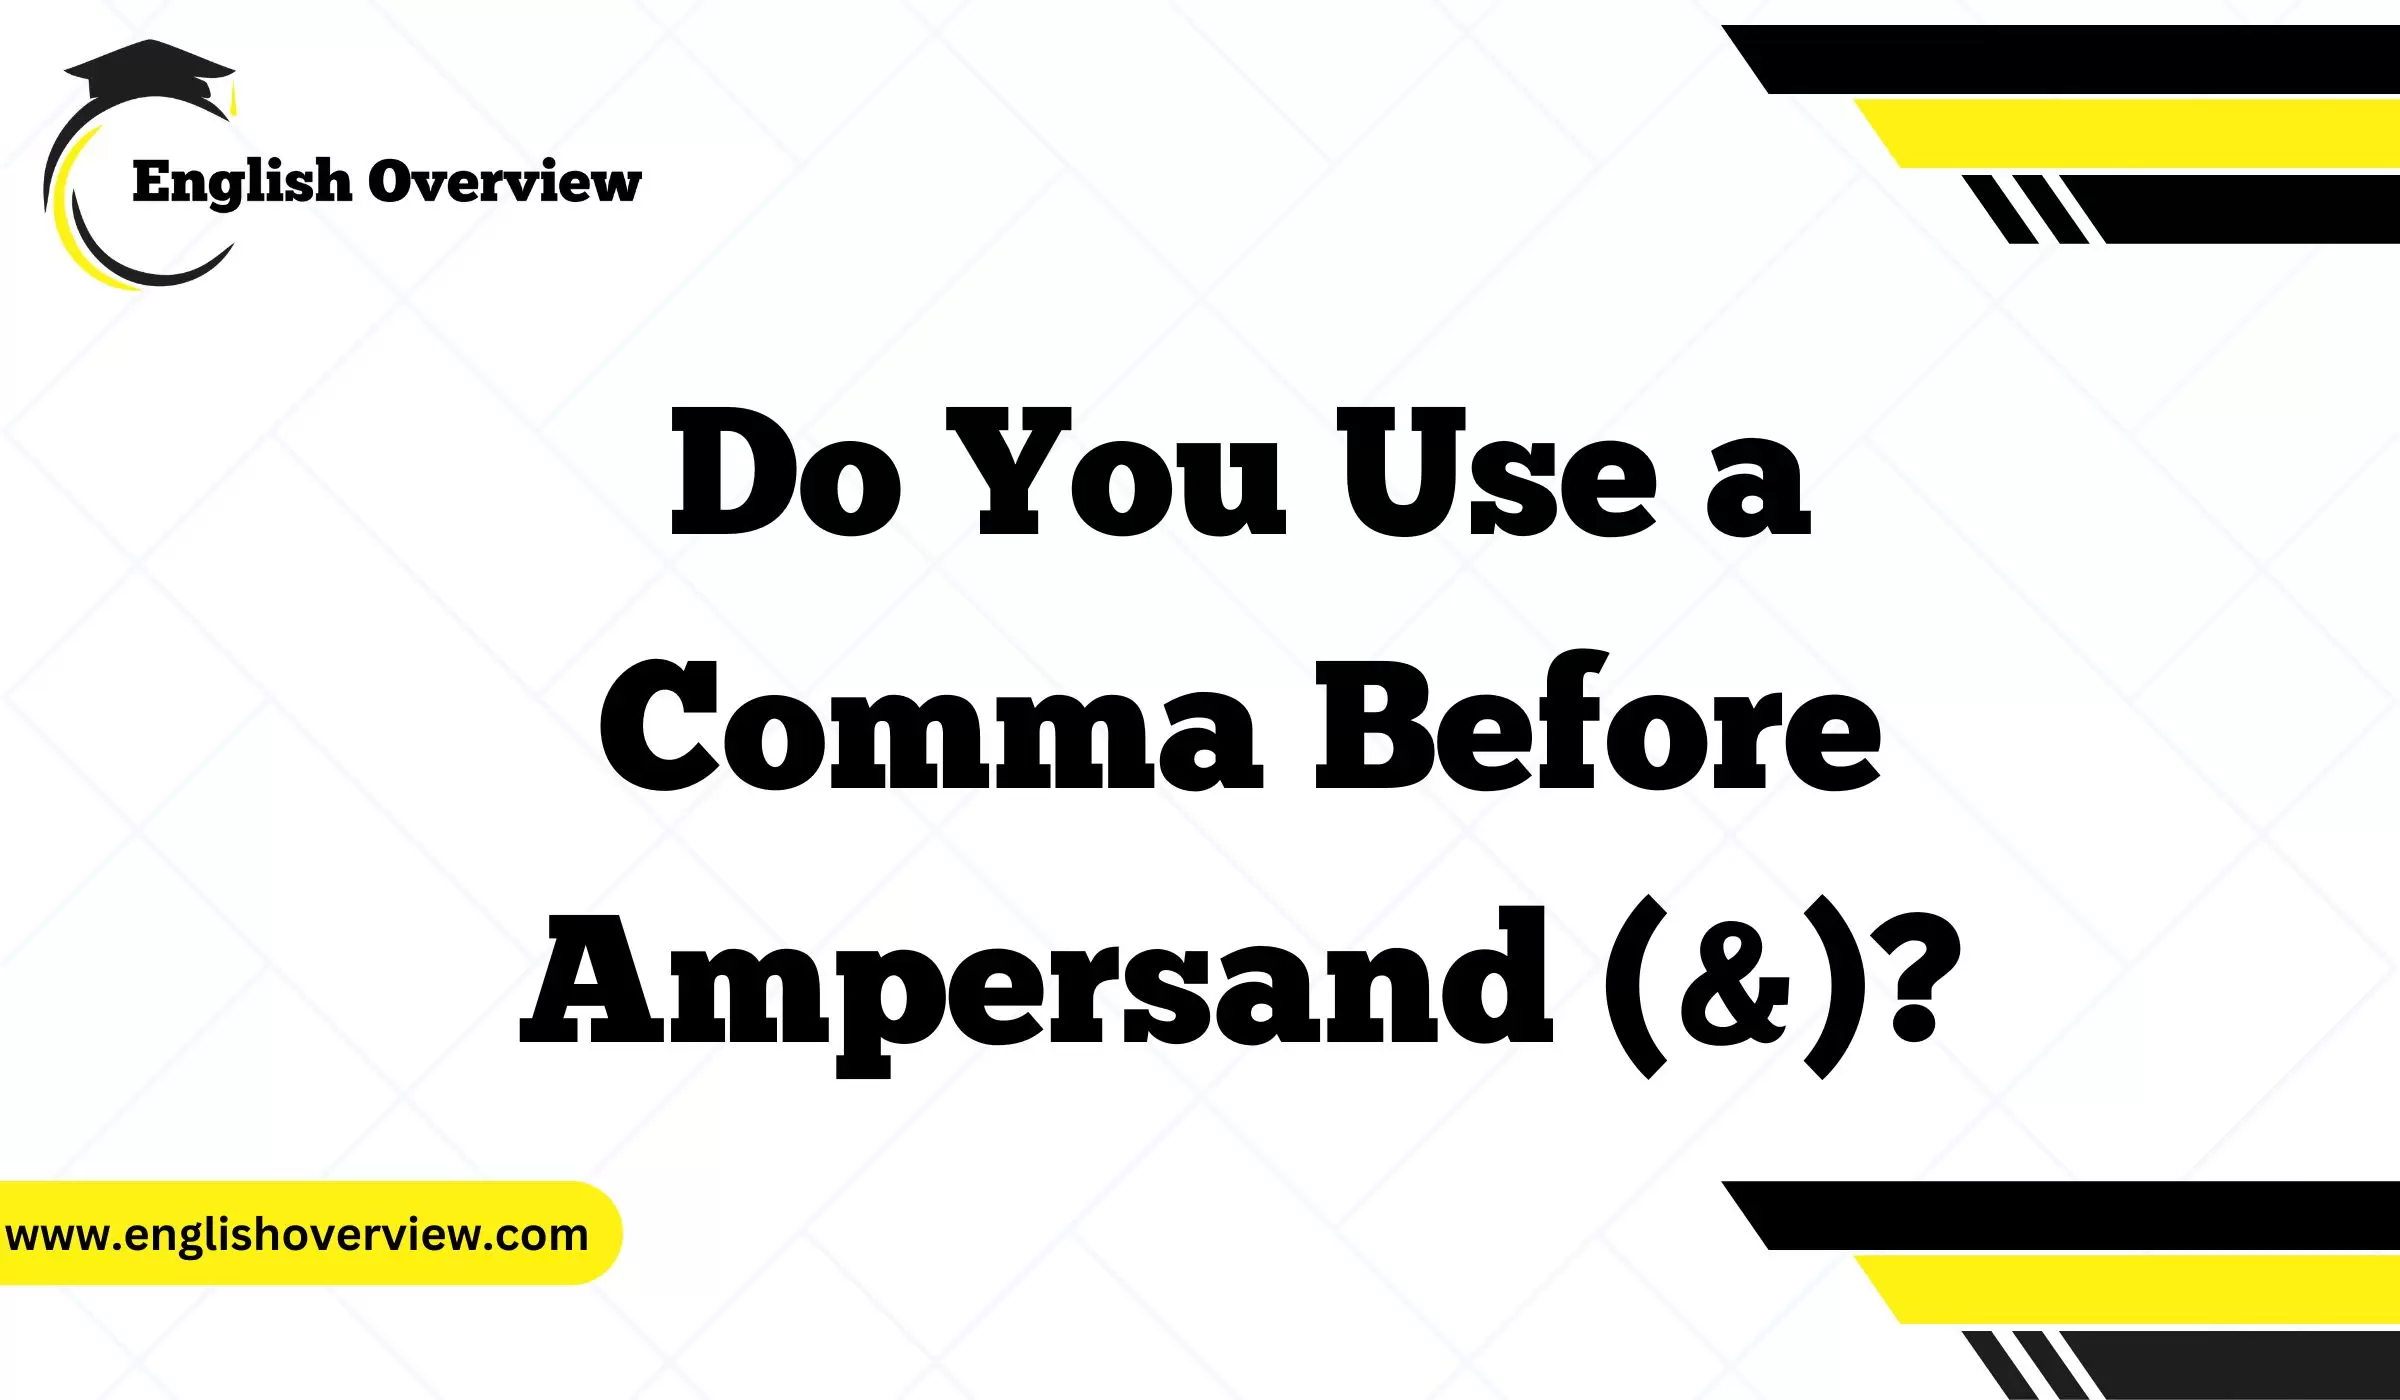 Do You Use a Comma Before Ampersand (&)